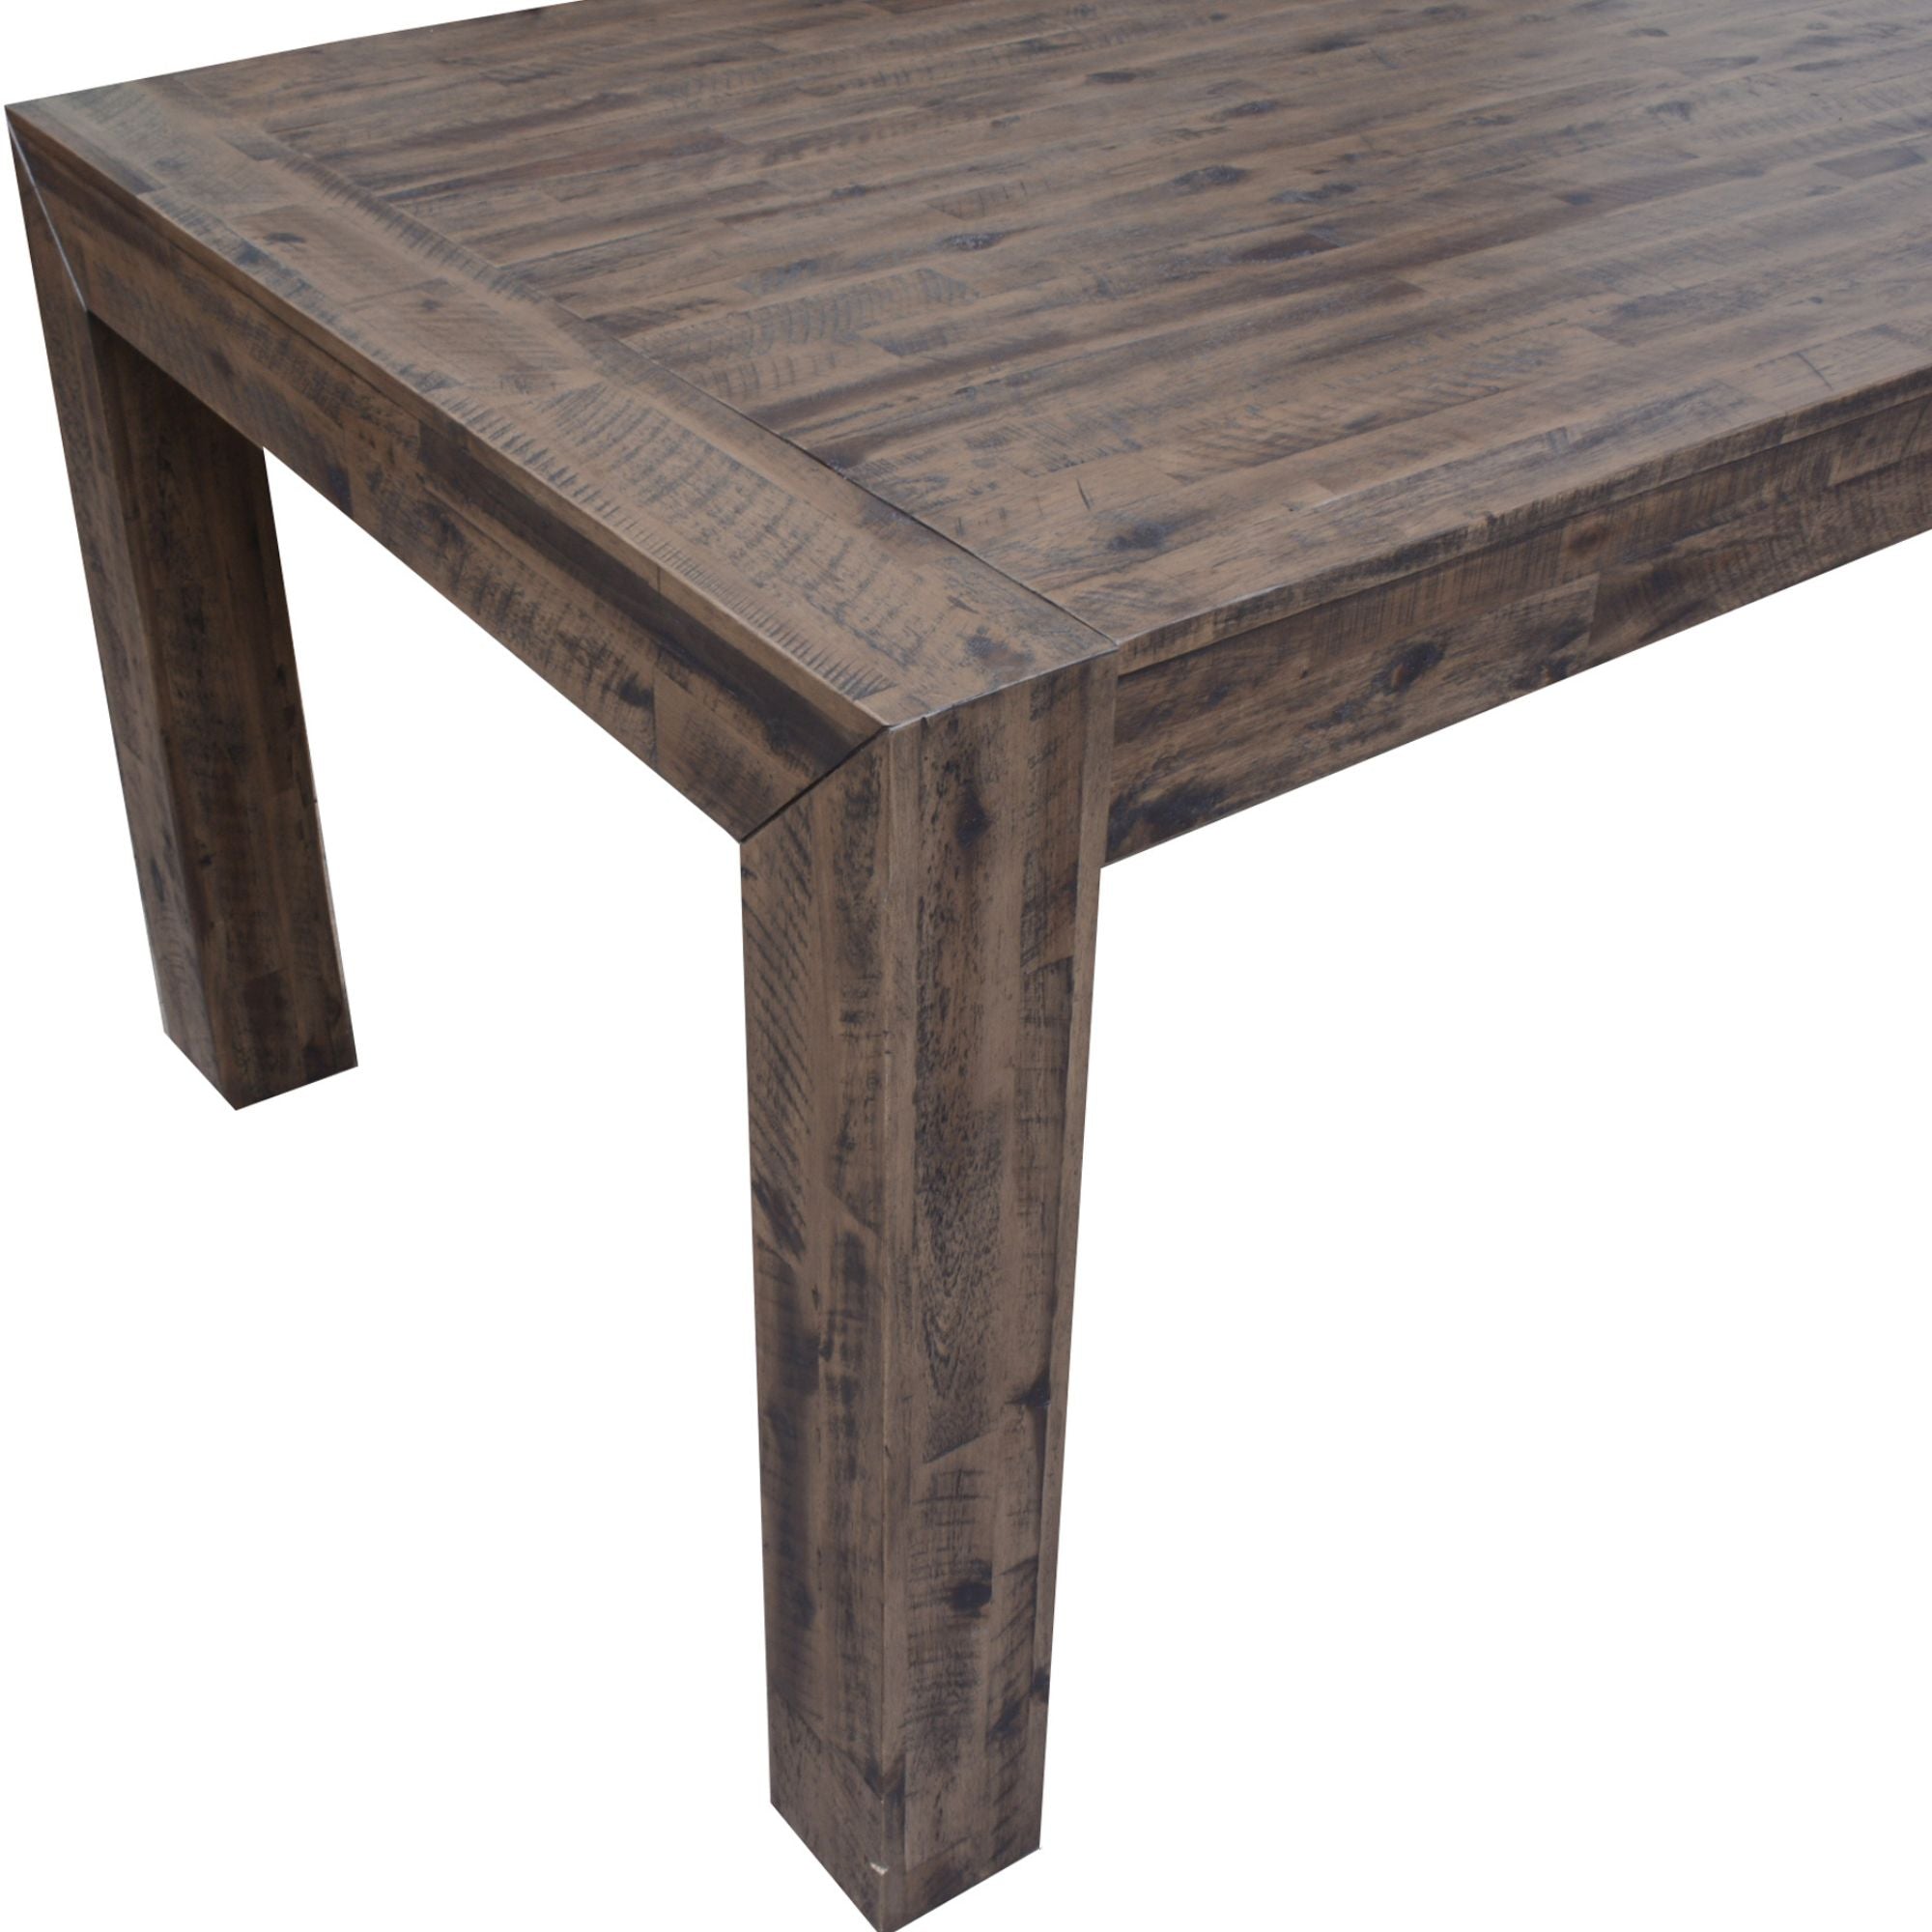 Dining Table 210Cm 8 Seater Solid Acacia Timber Wood - Stone Grey